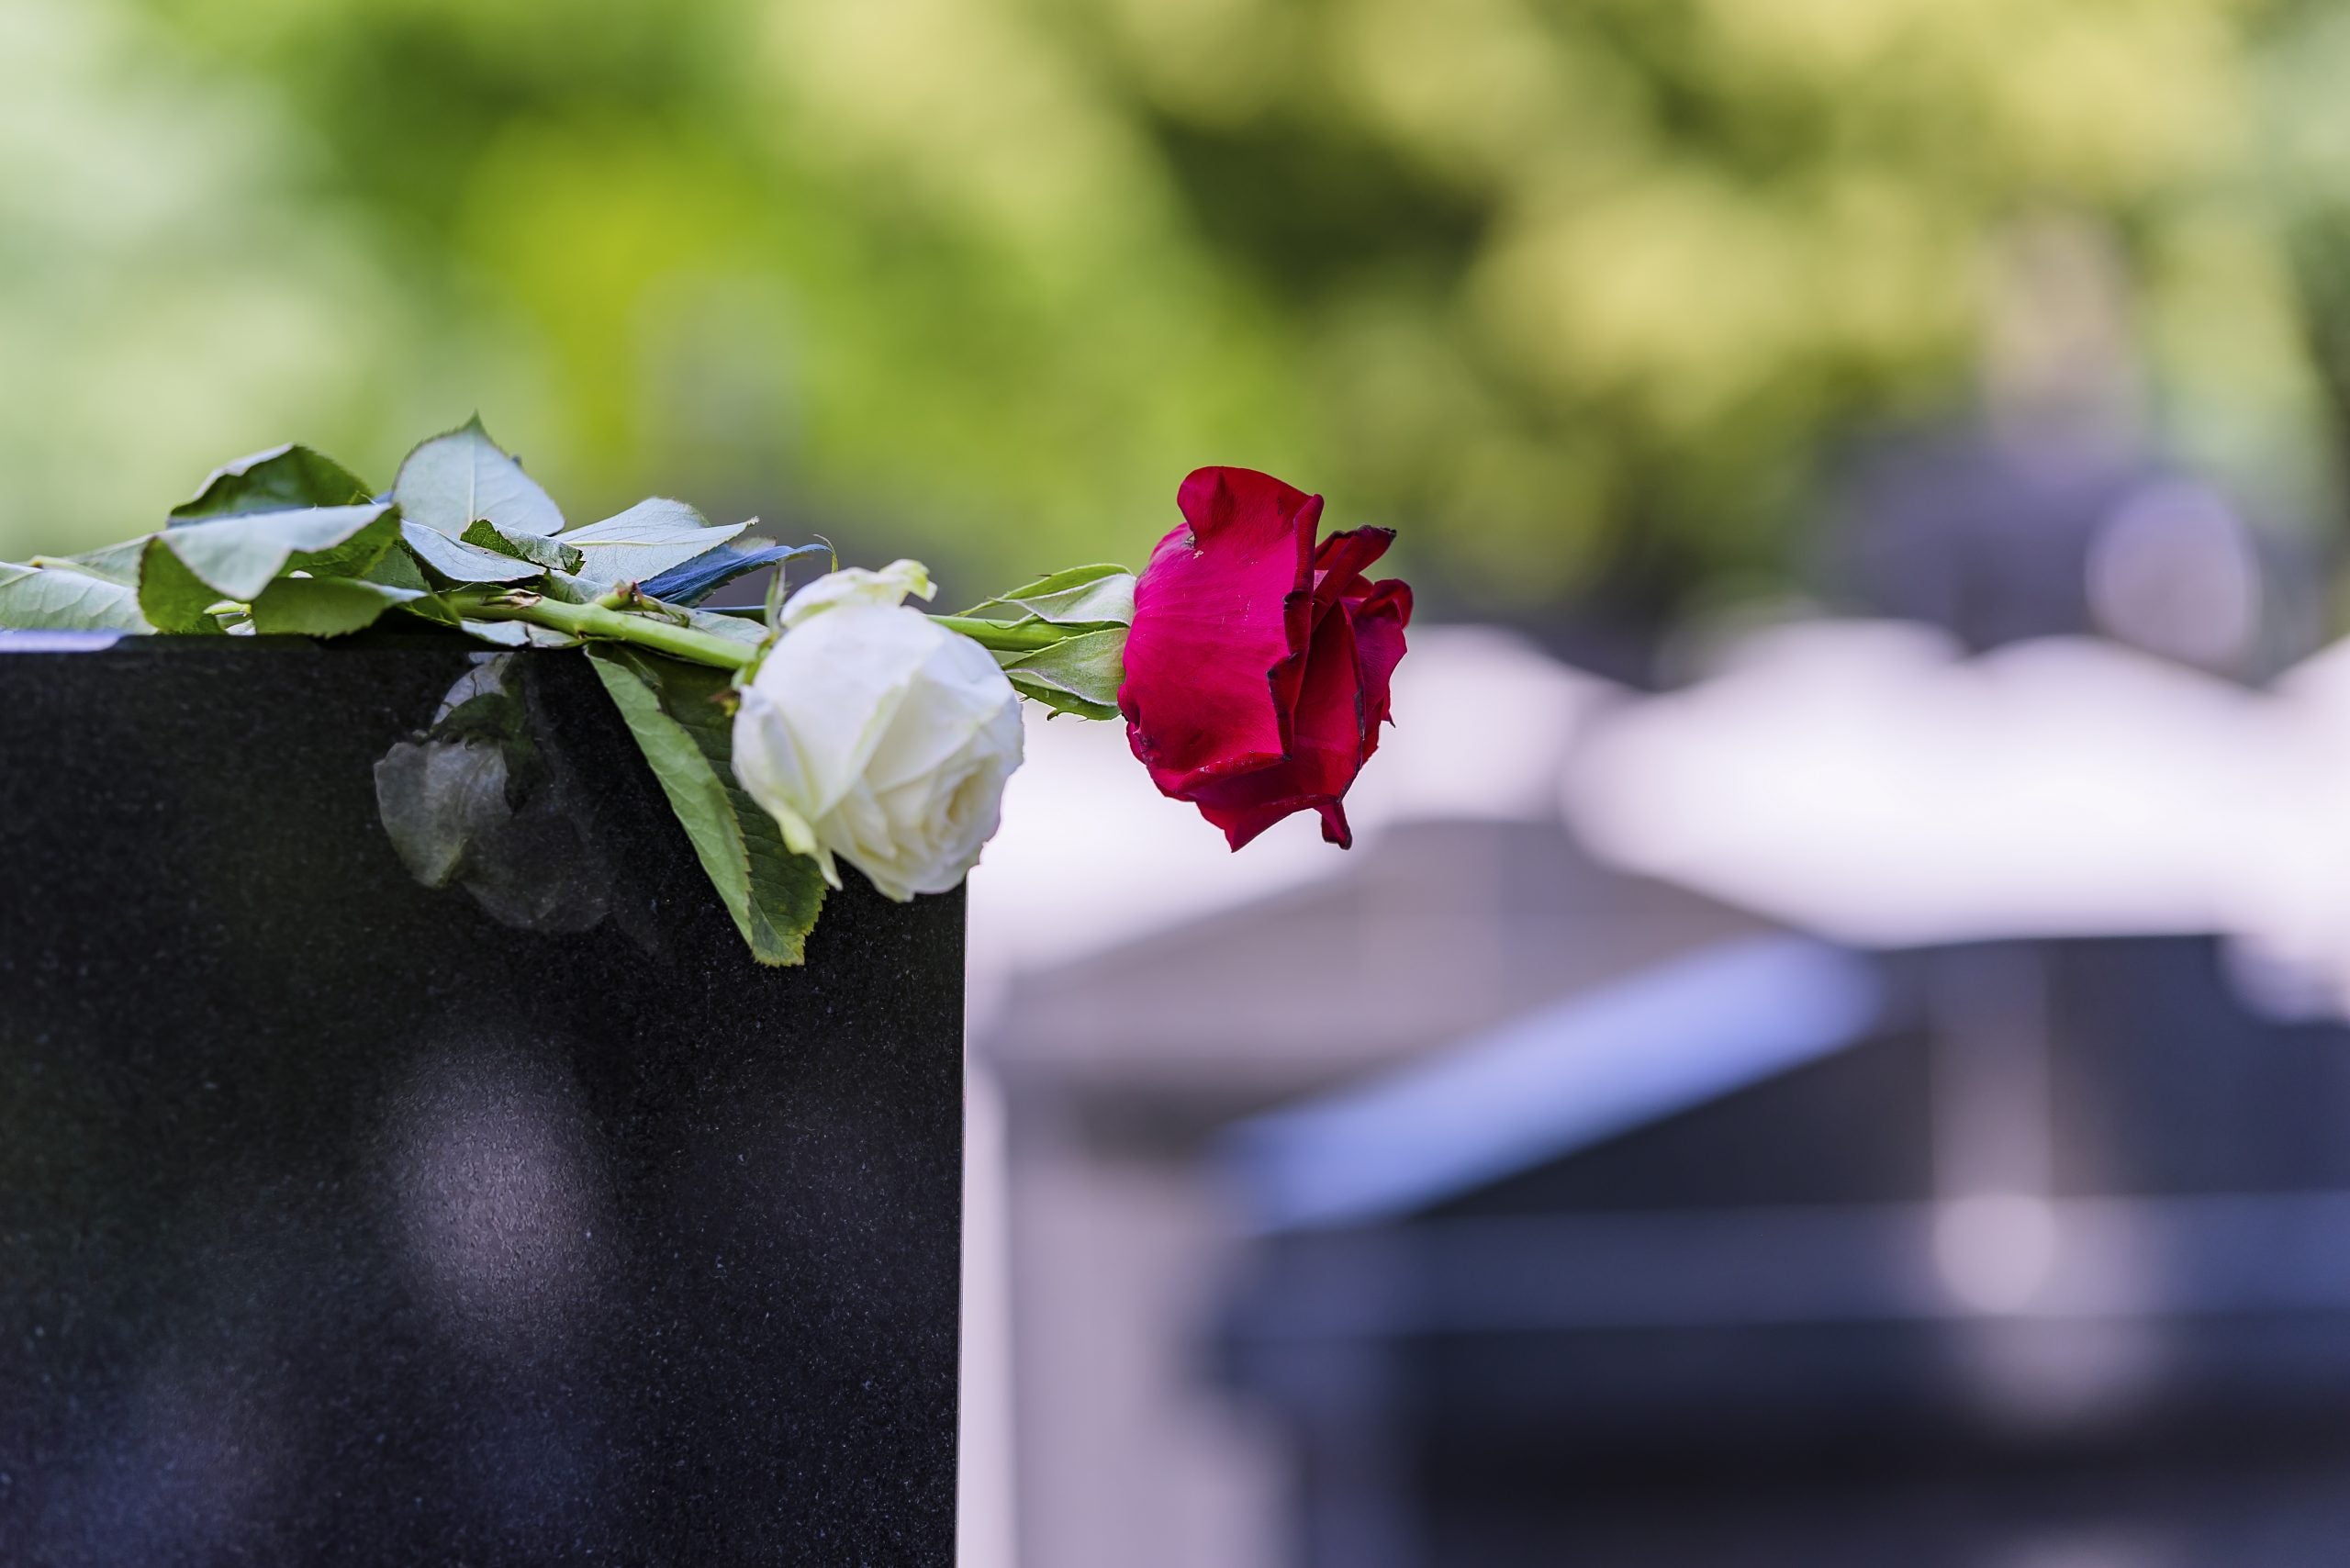 Six Dead Of Coronavirus After Attending Funeral In South Carolina